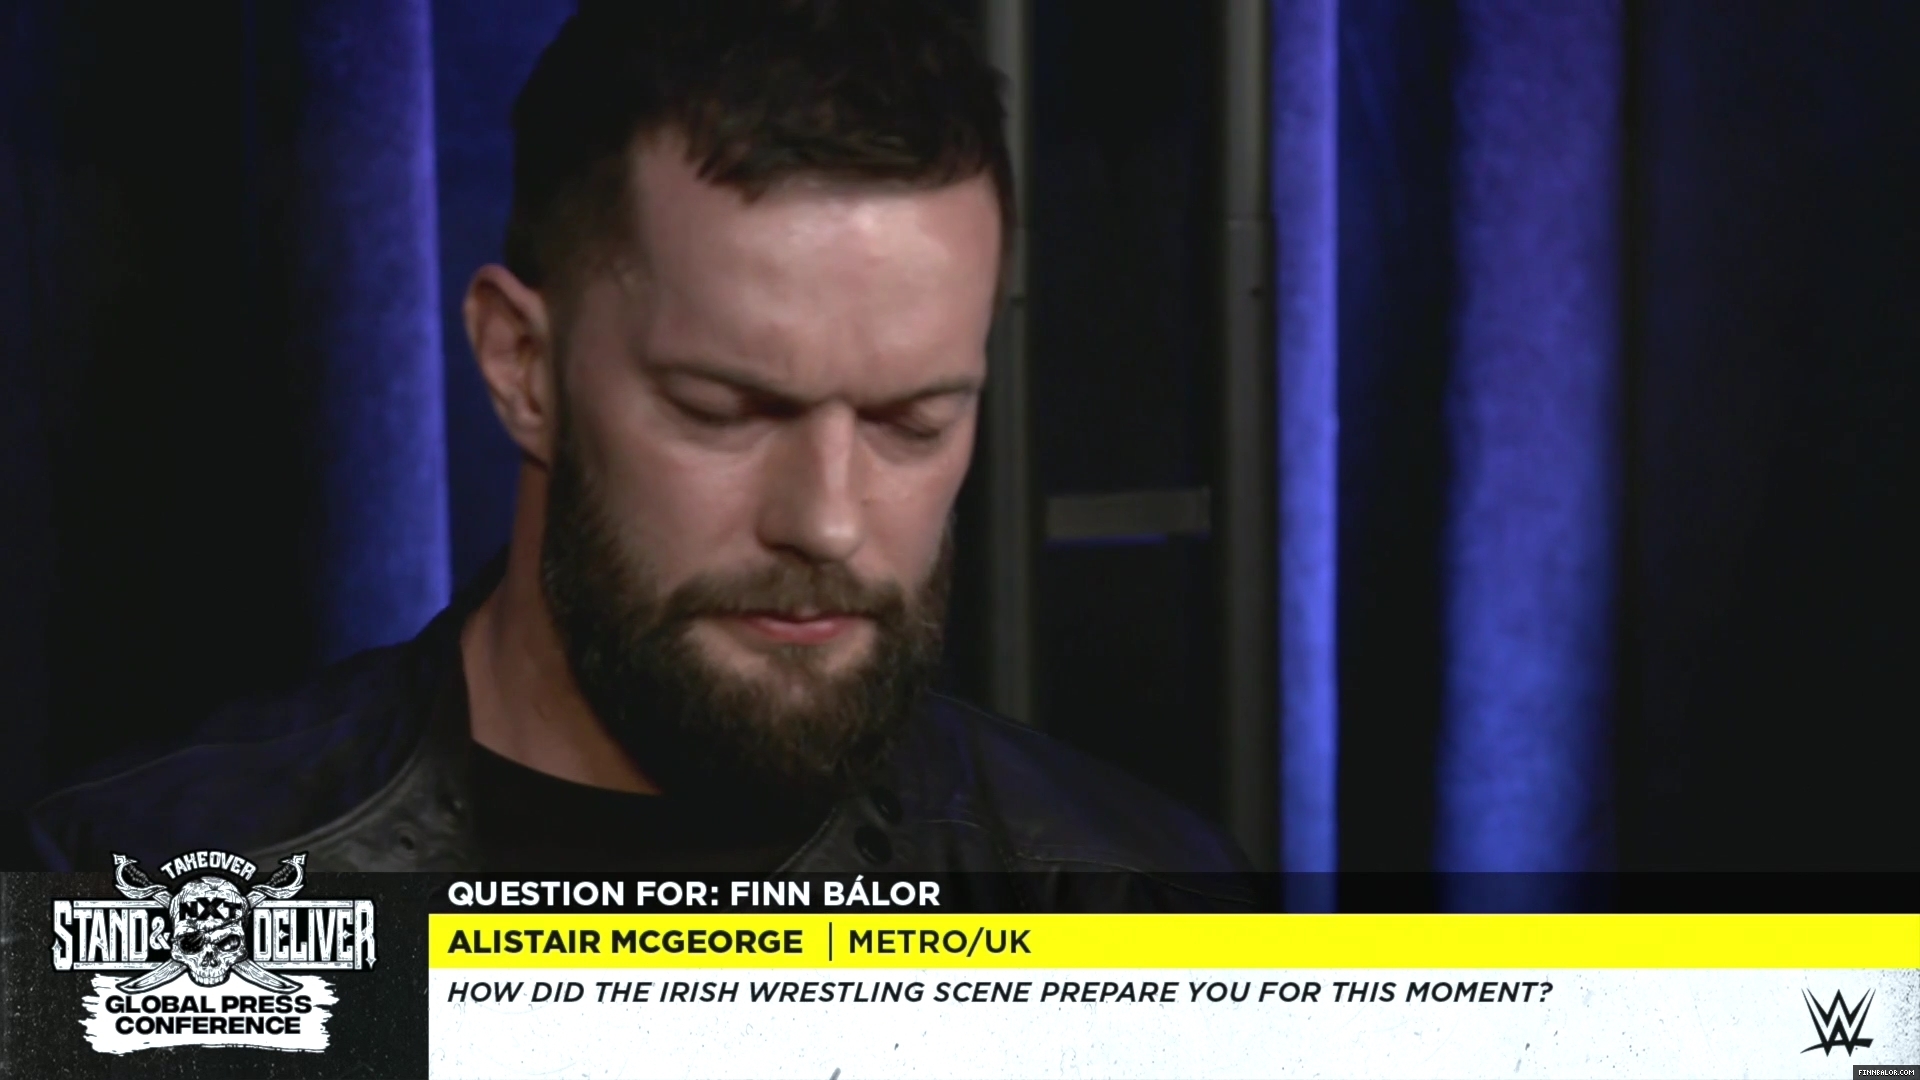 WWE_NXT_TakeOver_Stand_and_Deliver_2021_Global_Press_Conference_1080p_WEB_h264-HEEL_mp40944.jpg